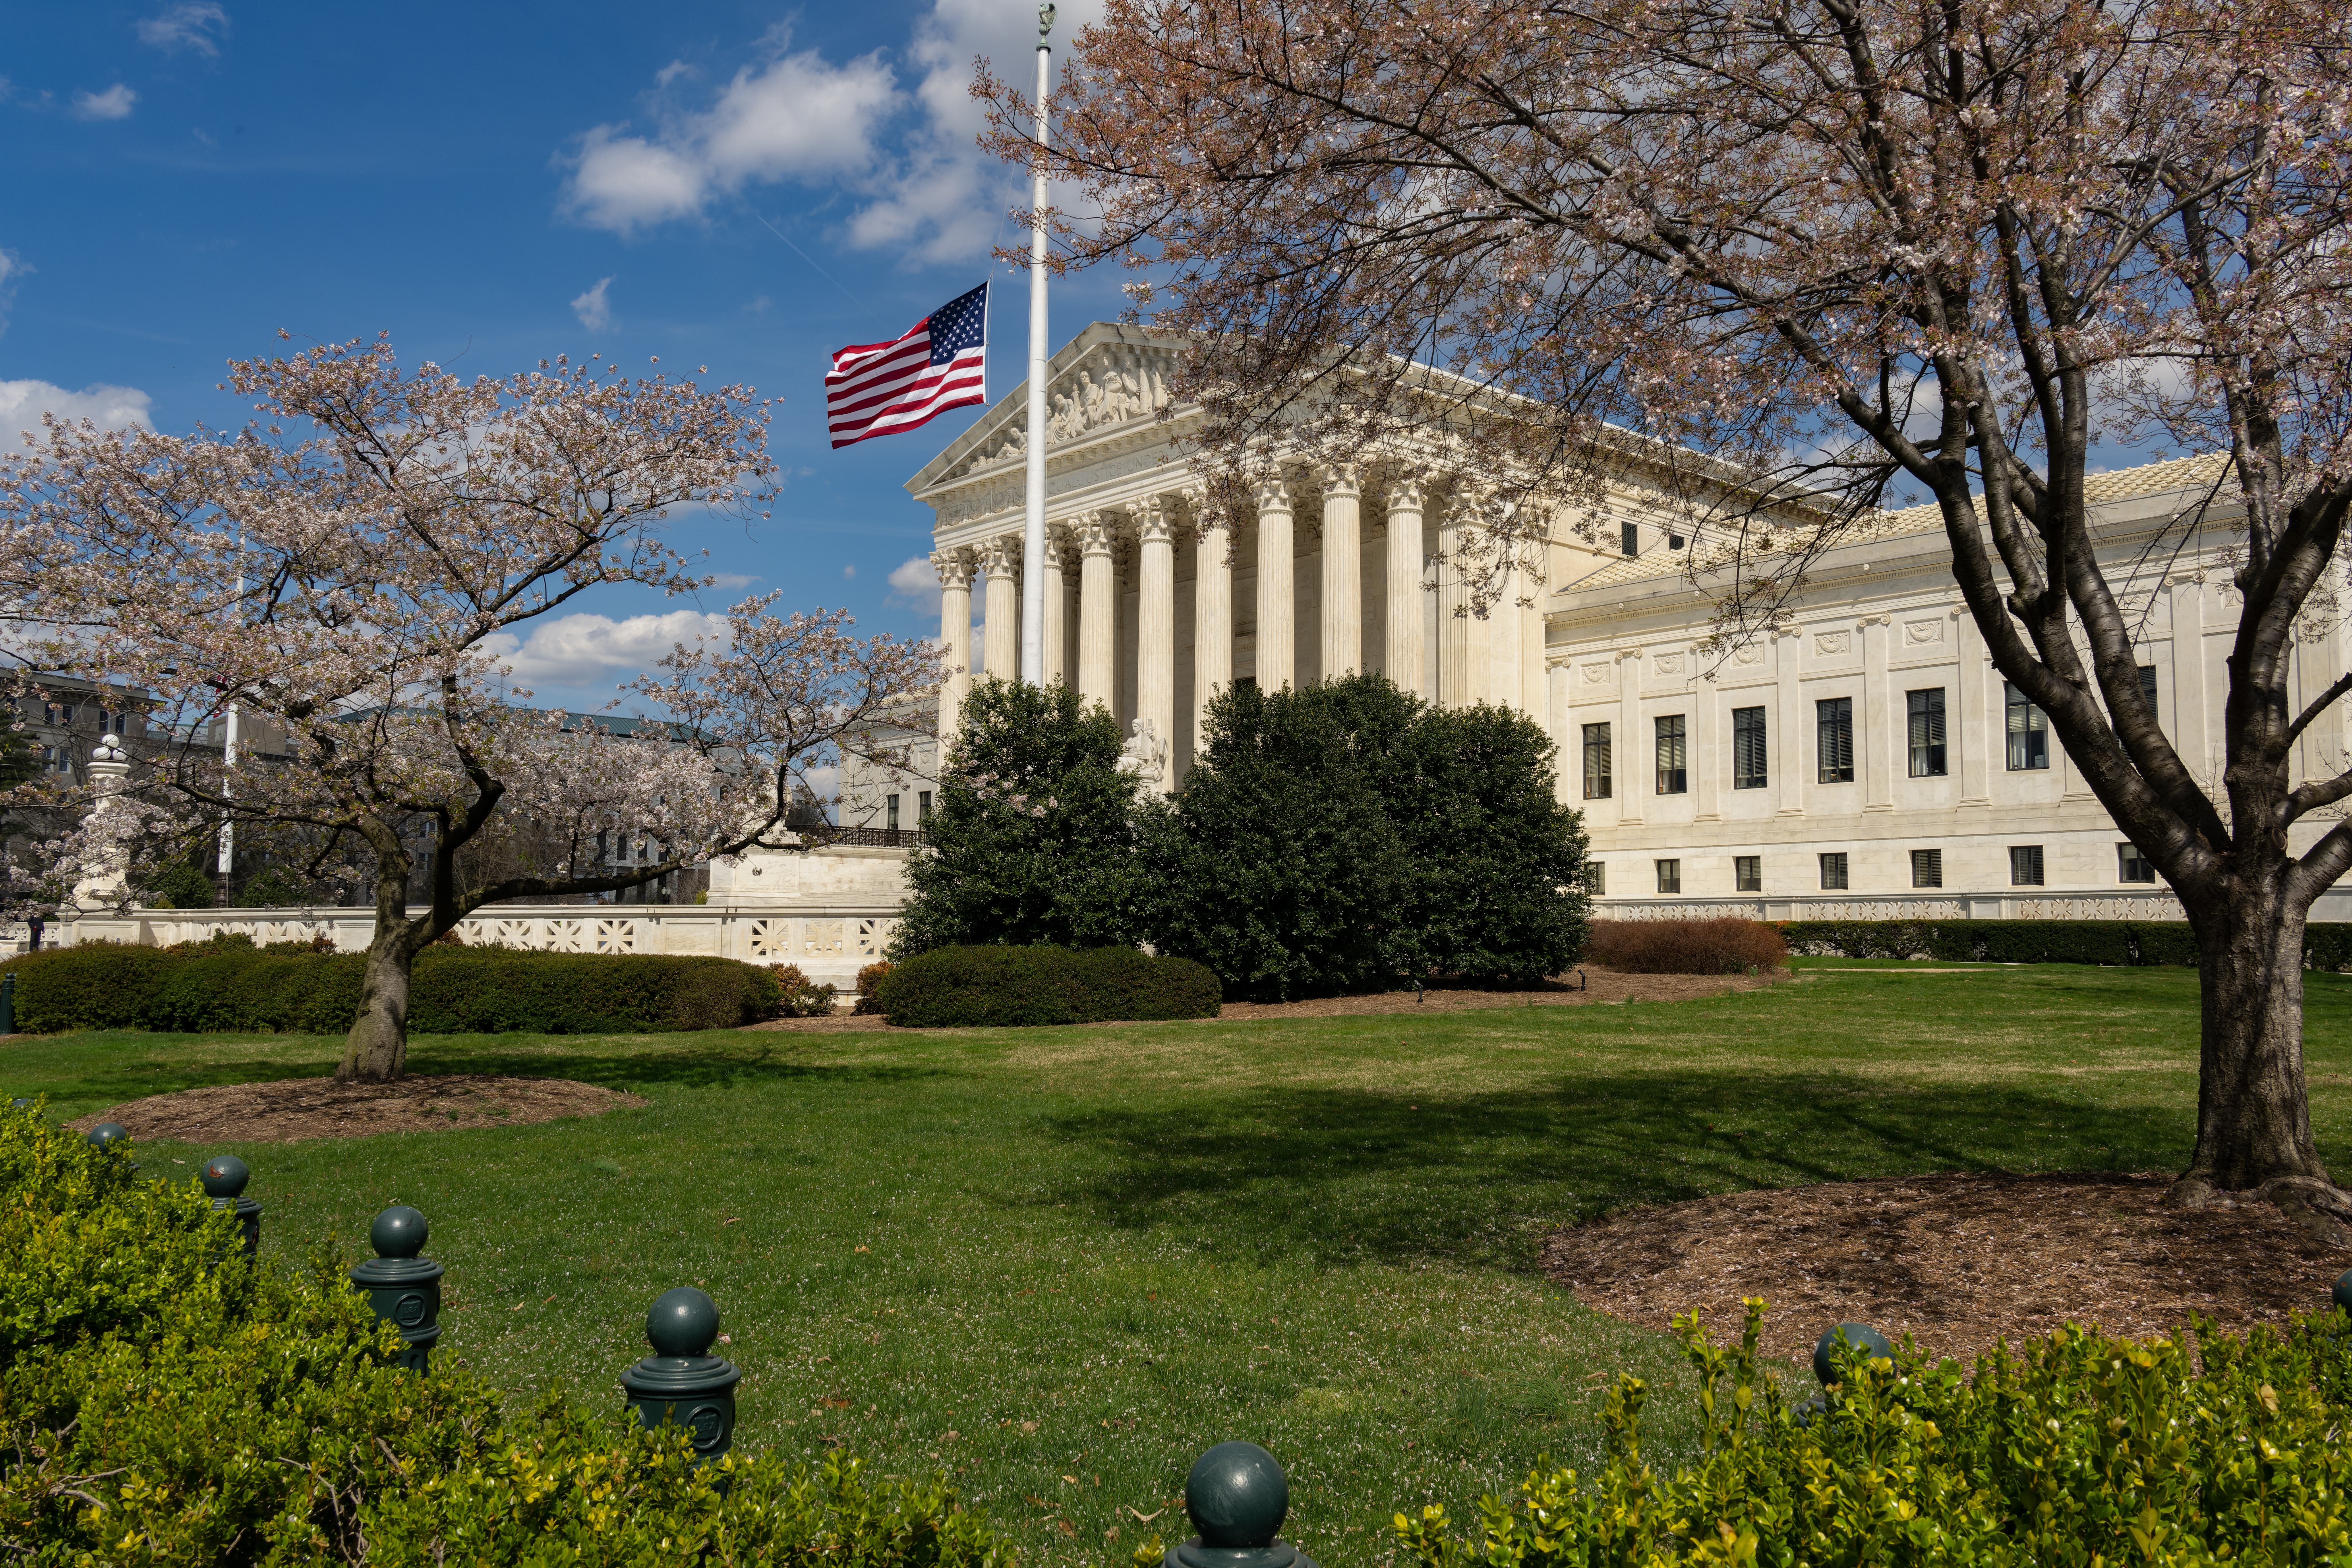 Photo of the Supreme Court Building